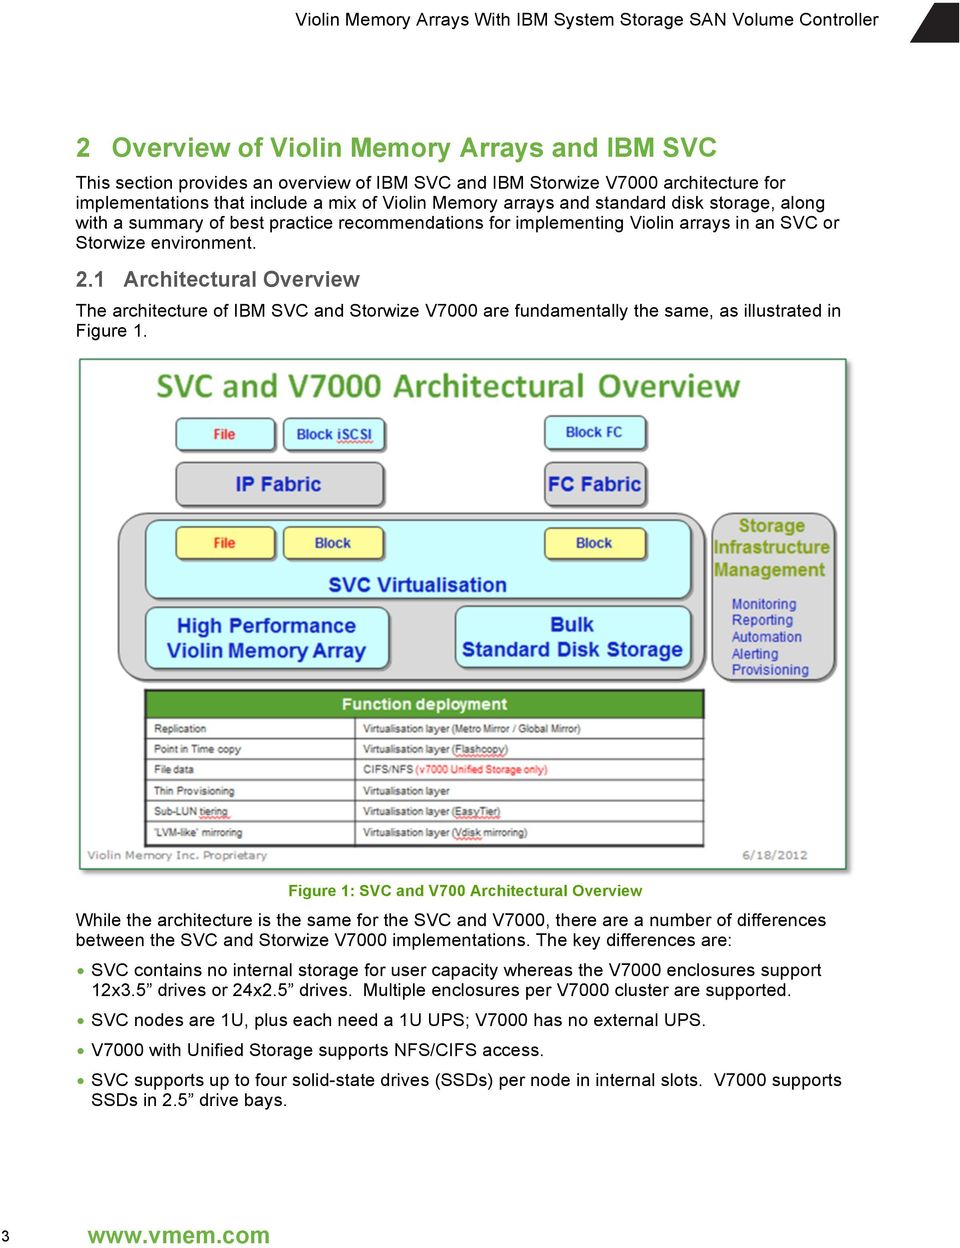 1 Architectural Overview The architecture of IBM SVC and Storwize V7000 are fundamentally the same, as illustrated in Figure 1.